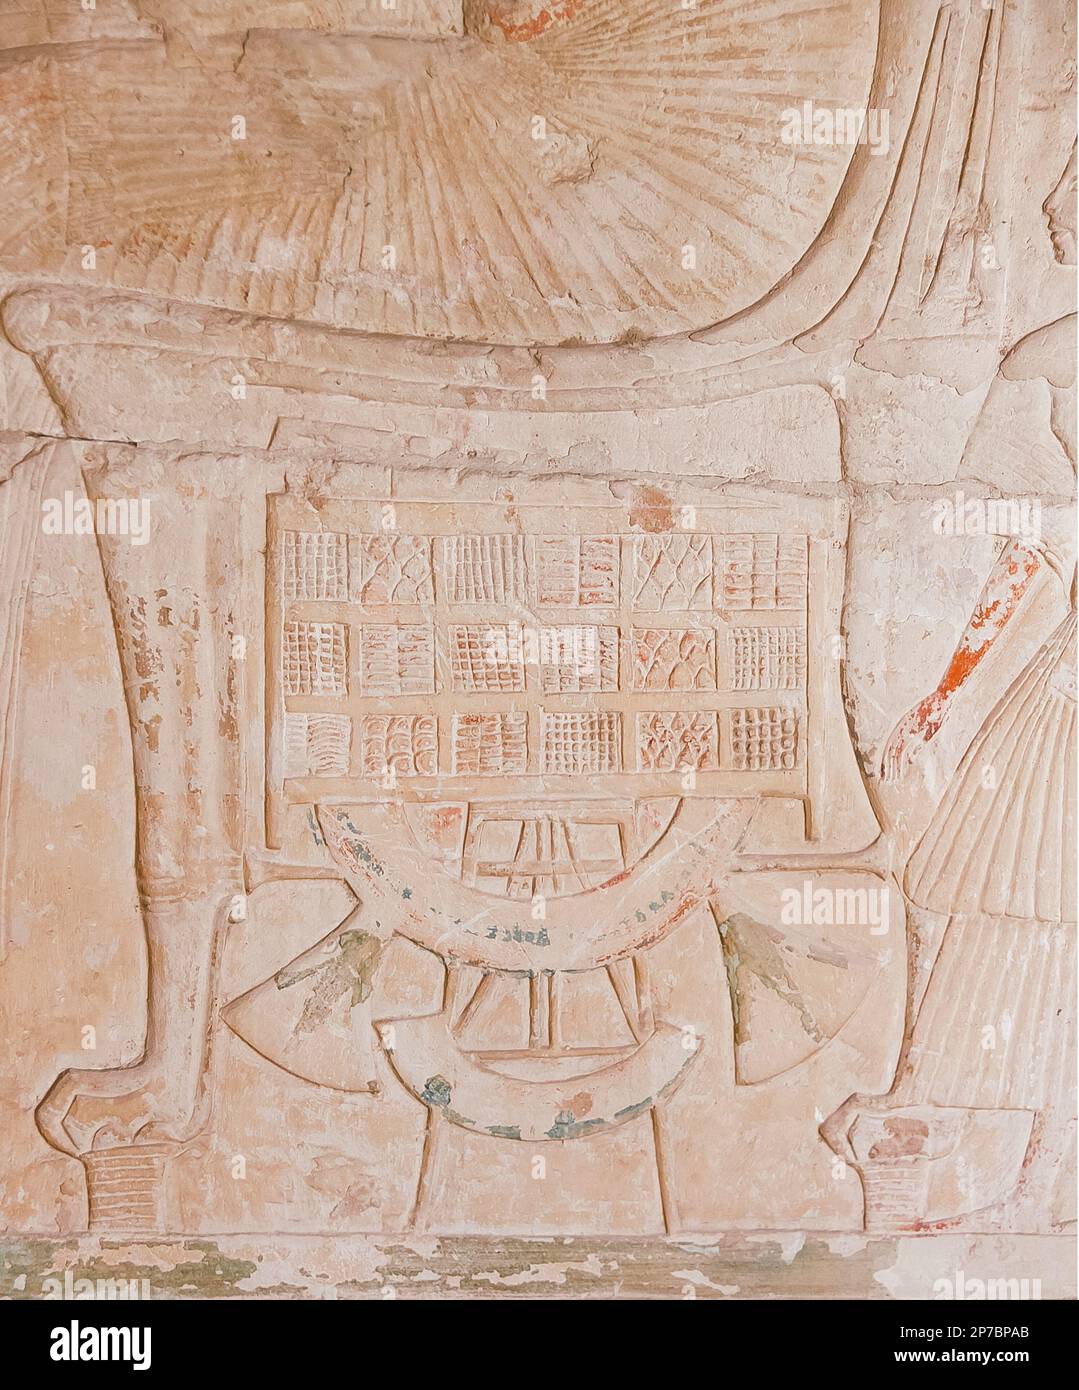 Egypt, Saqqara,  tomb of Horemheb,  inner room, South wall. Throne with lion paws, tabouret with floral motives, fruits and biscuits. Stock Photo